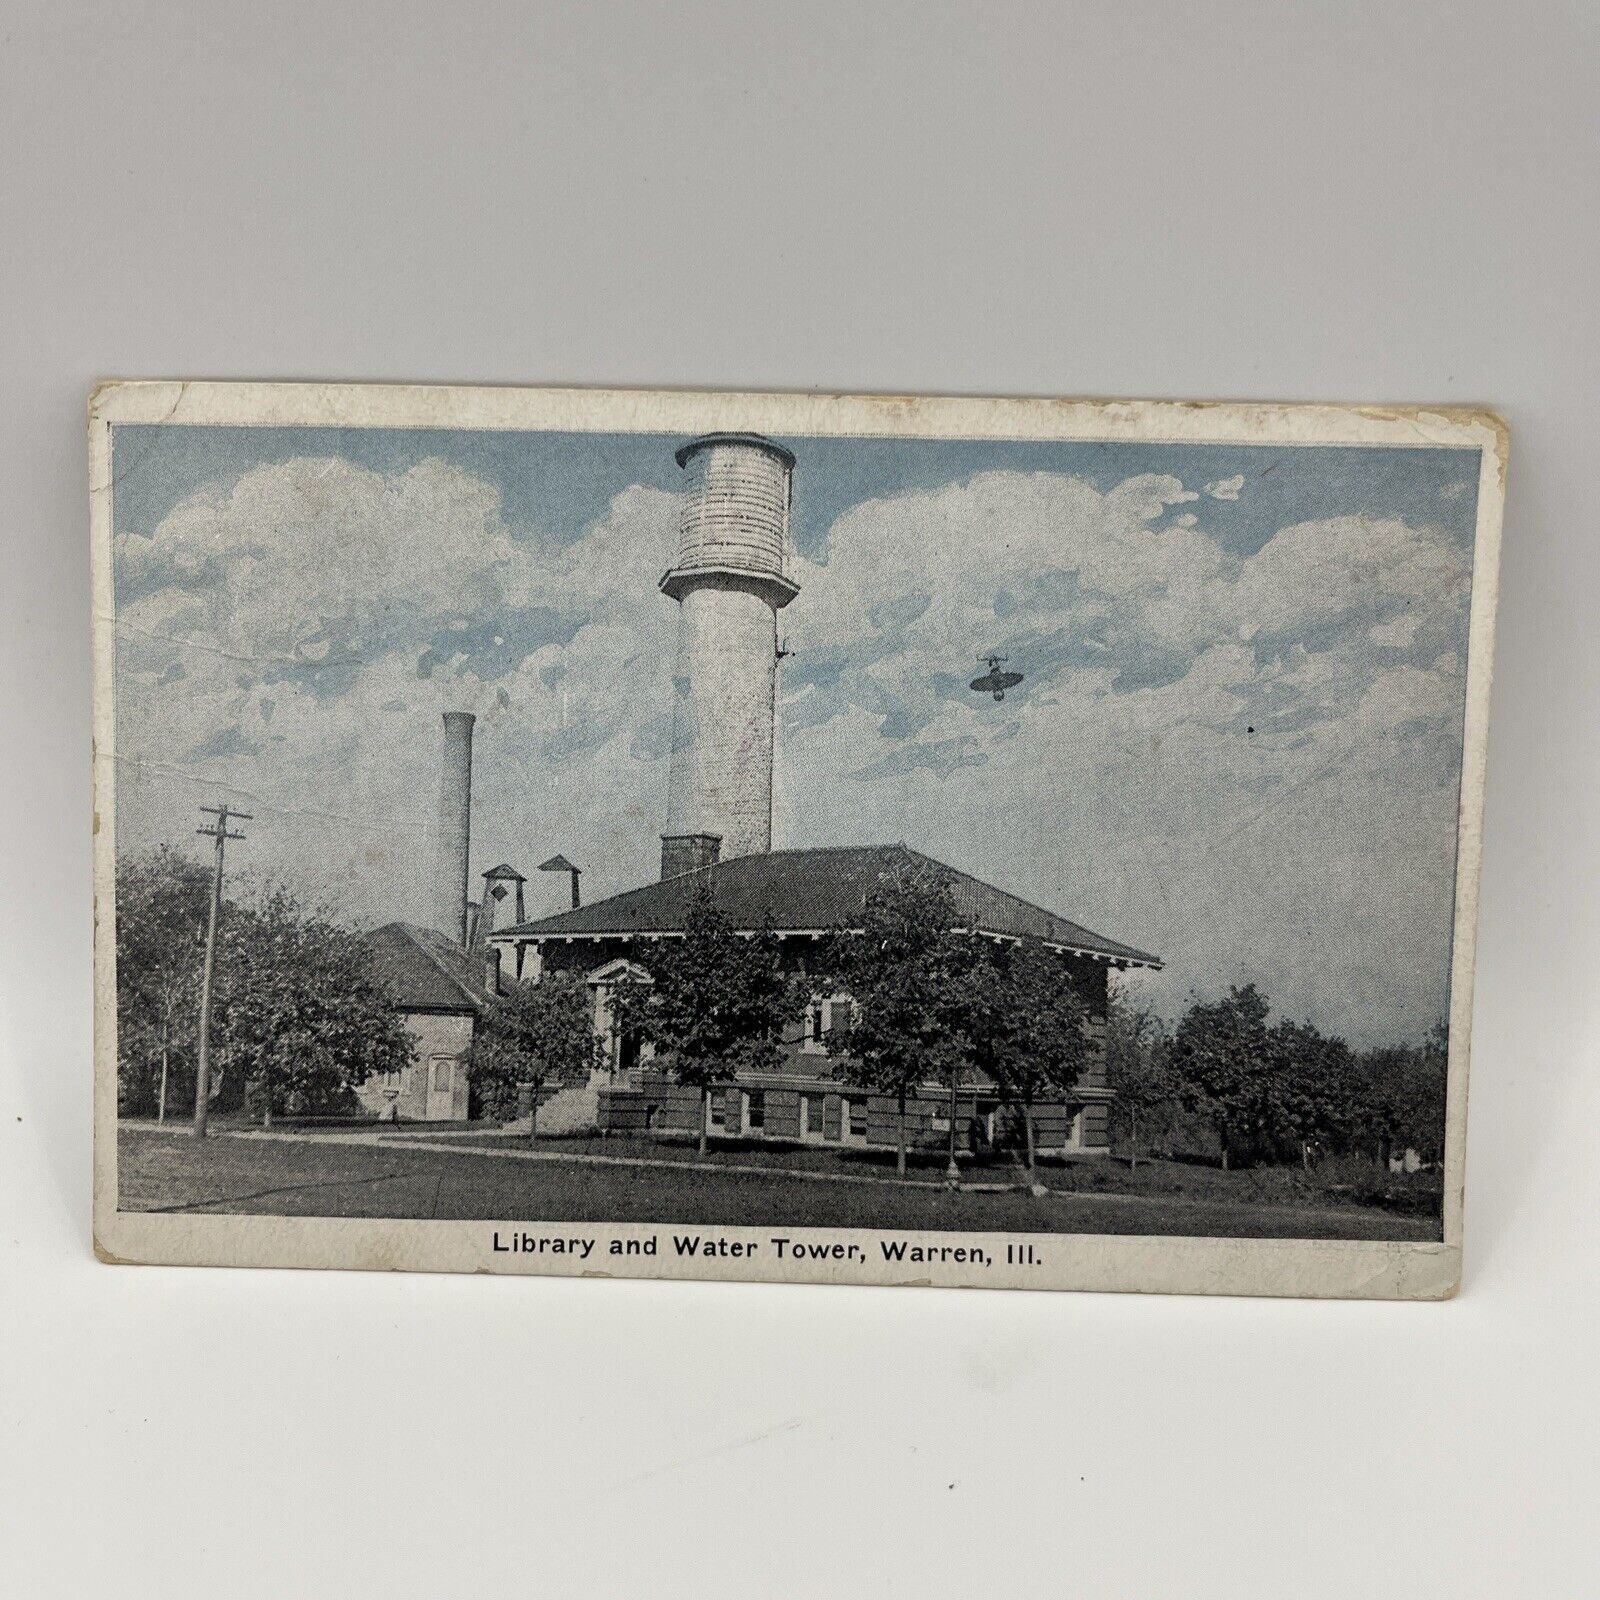 Library and Water Tower, Warren, Illinois Postcard